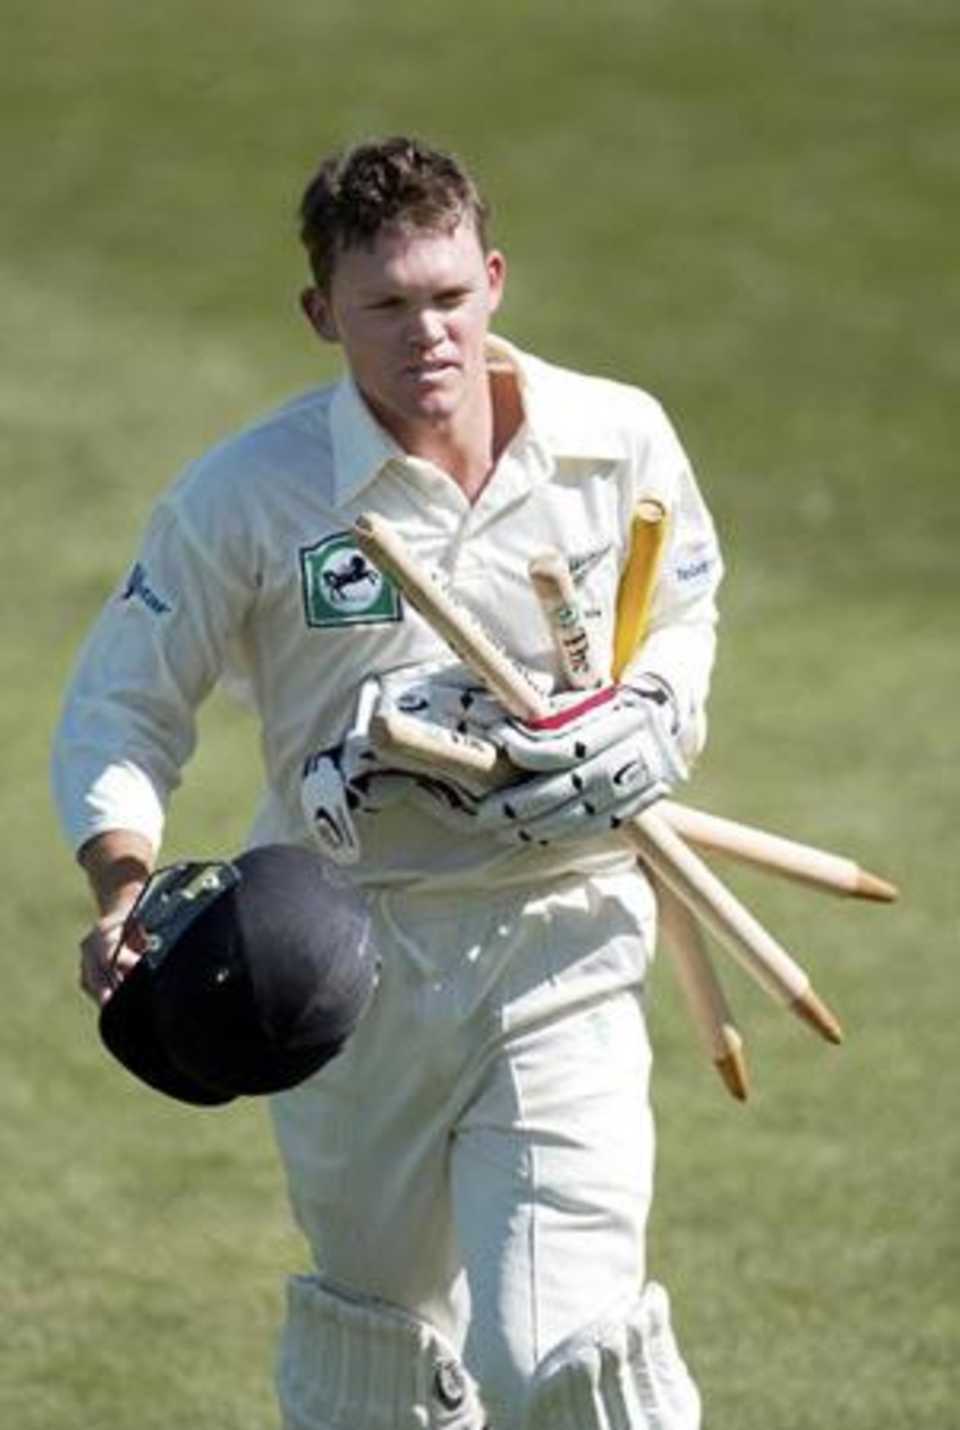 Vincent runs from the field with a clutch of stumps after New Zealand won the match. 1st Test: New Zealand v India at Wellington, 12-16 Dec 2002